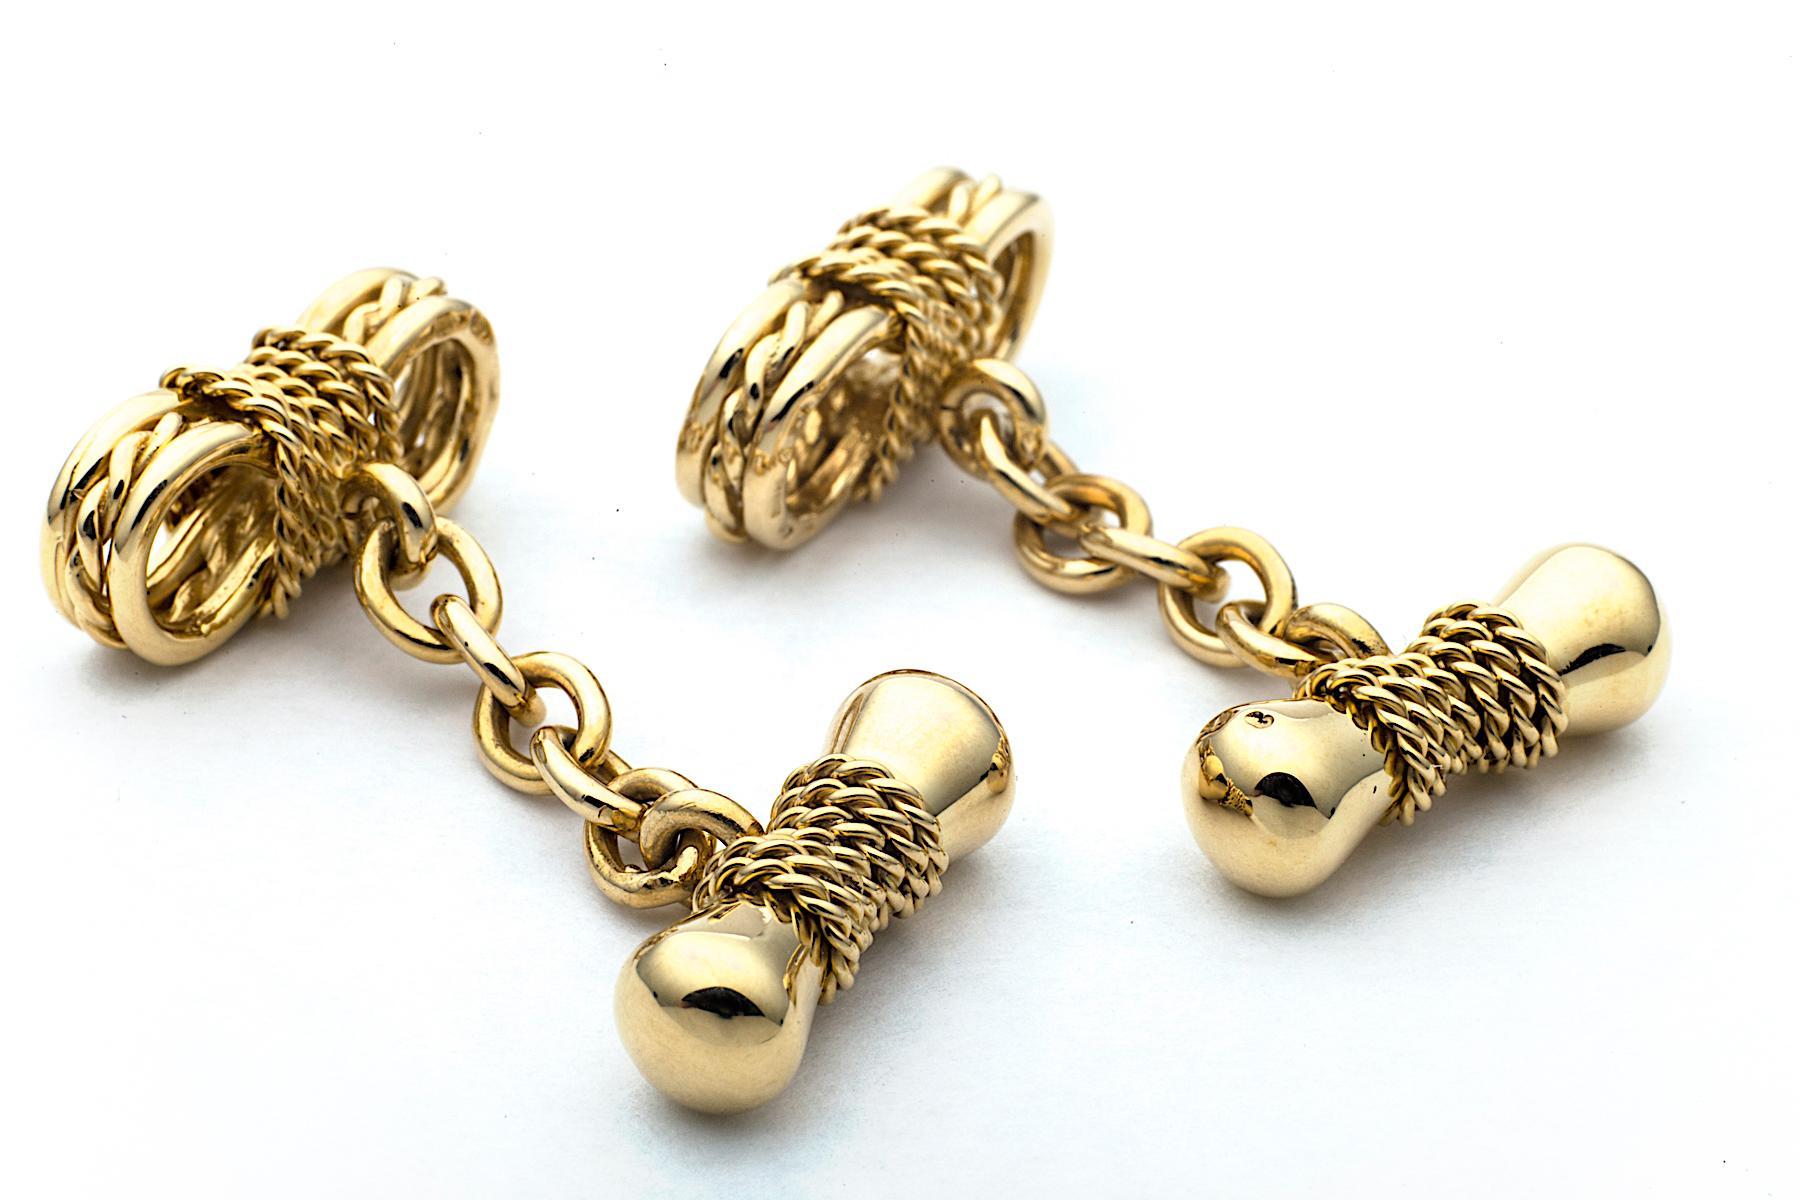 It will always be anchors away when wearing these vintage Longmire London 18 karat yellow gold cufflinks.  With wrapped and twisted rope detailing, these nautically inspired cufflinks guarantee smooth sailing.  Circa 1988.  Chain link connections. 